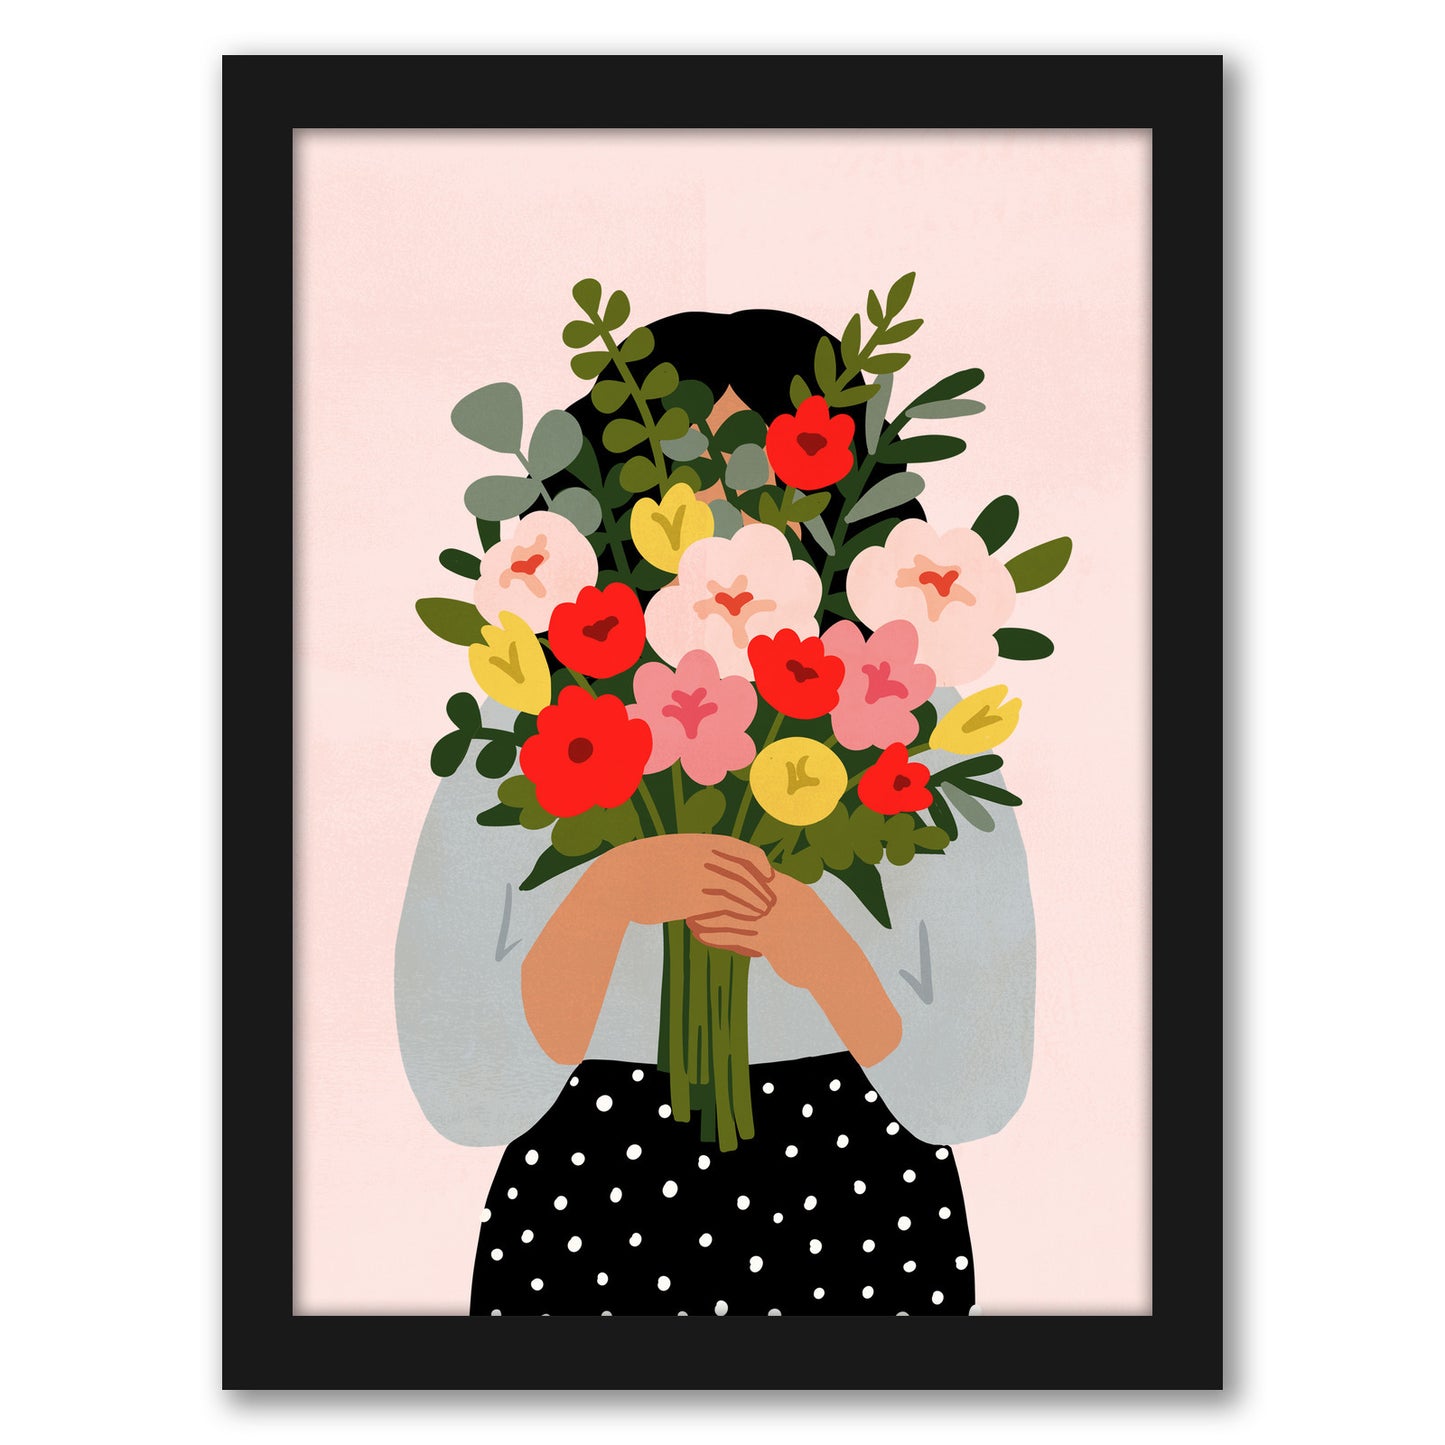 Darling Valentine II by Victoria Borges by World Art Group - Black Framed Print - Wall Art - Americanflat